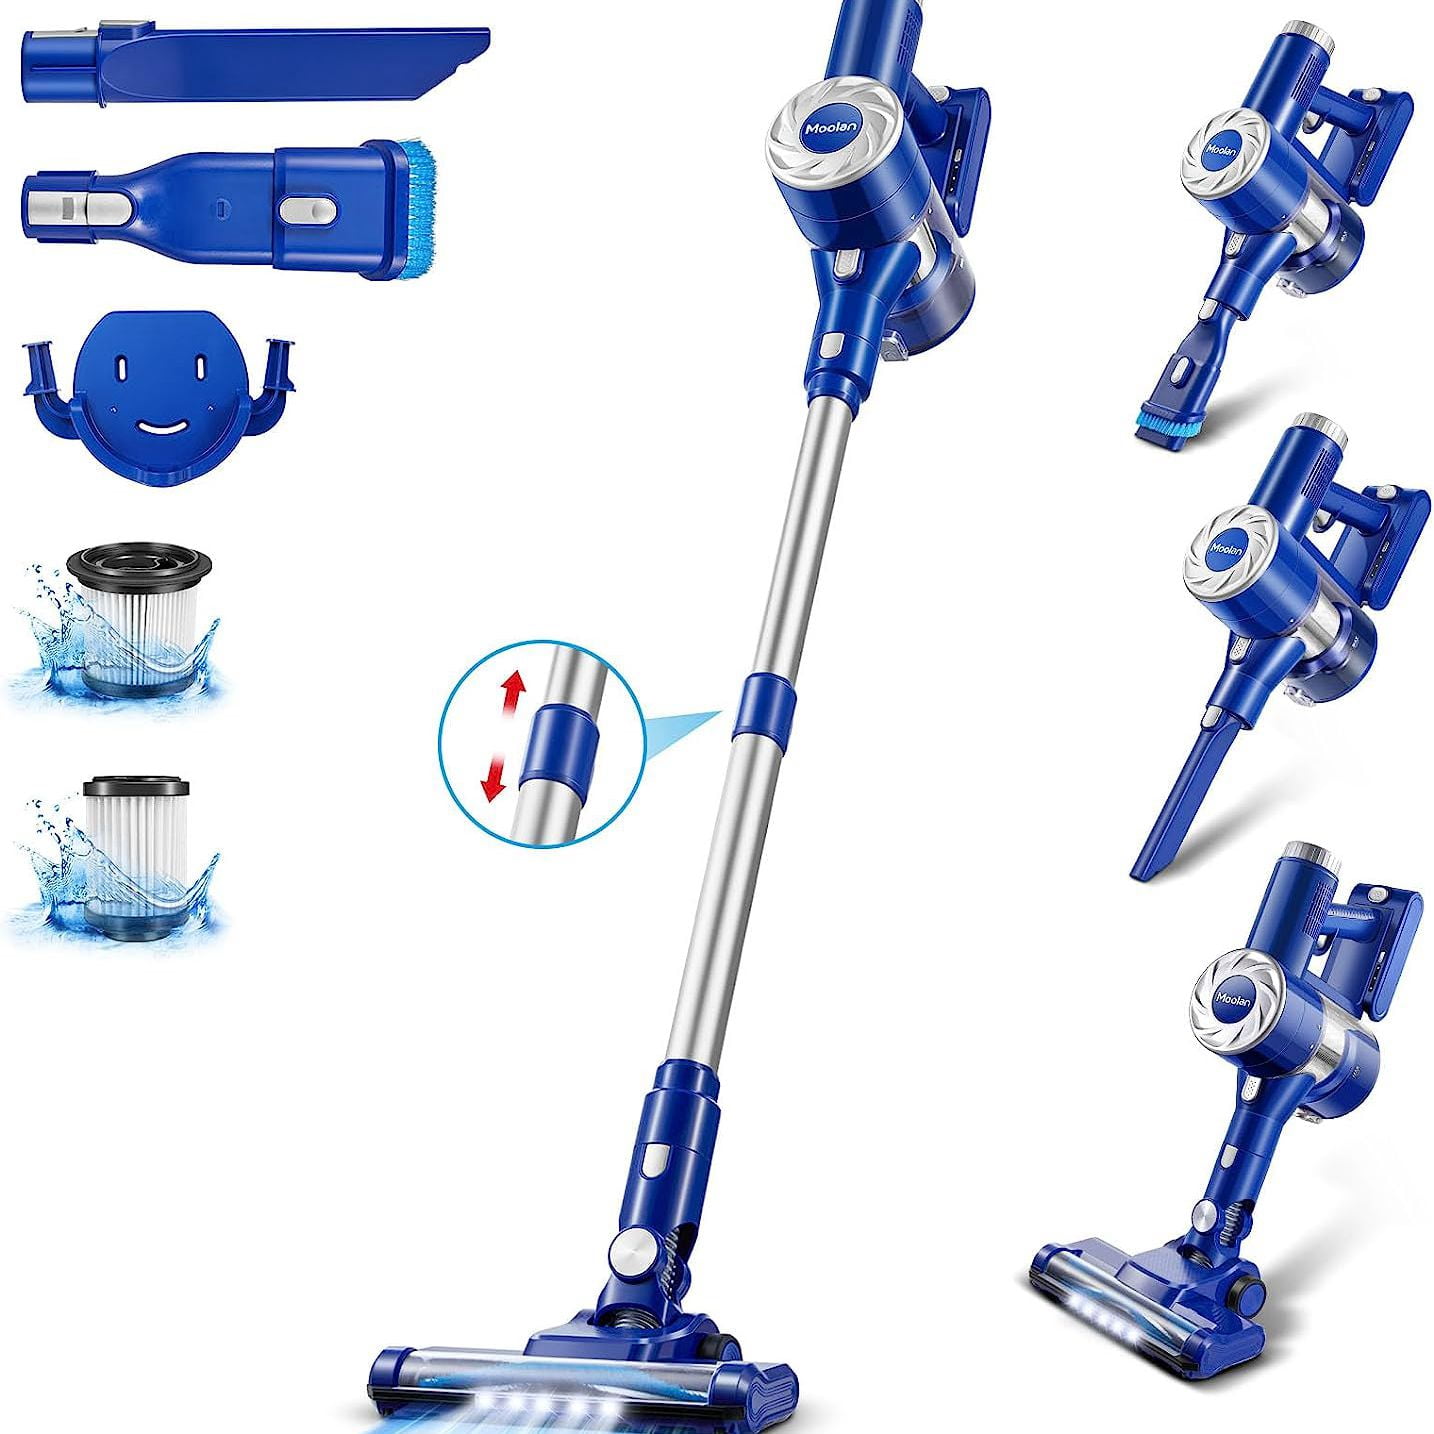 Dyson Cyclone V10 Absolute Lightweight Cordless Stick Vacuum Cleaner -  Hamilton Vacuums